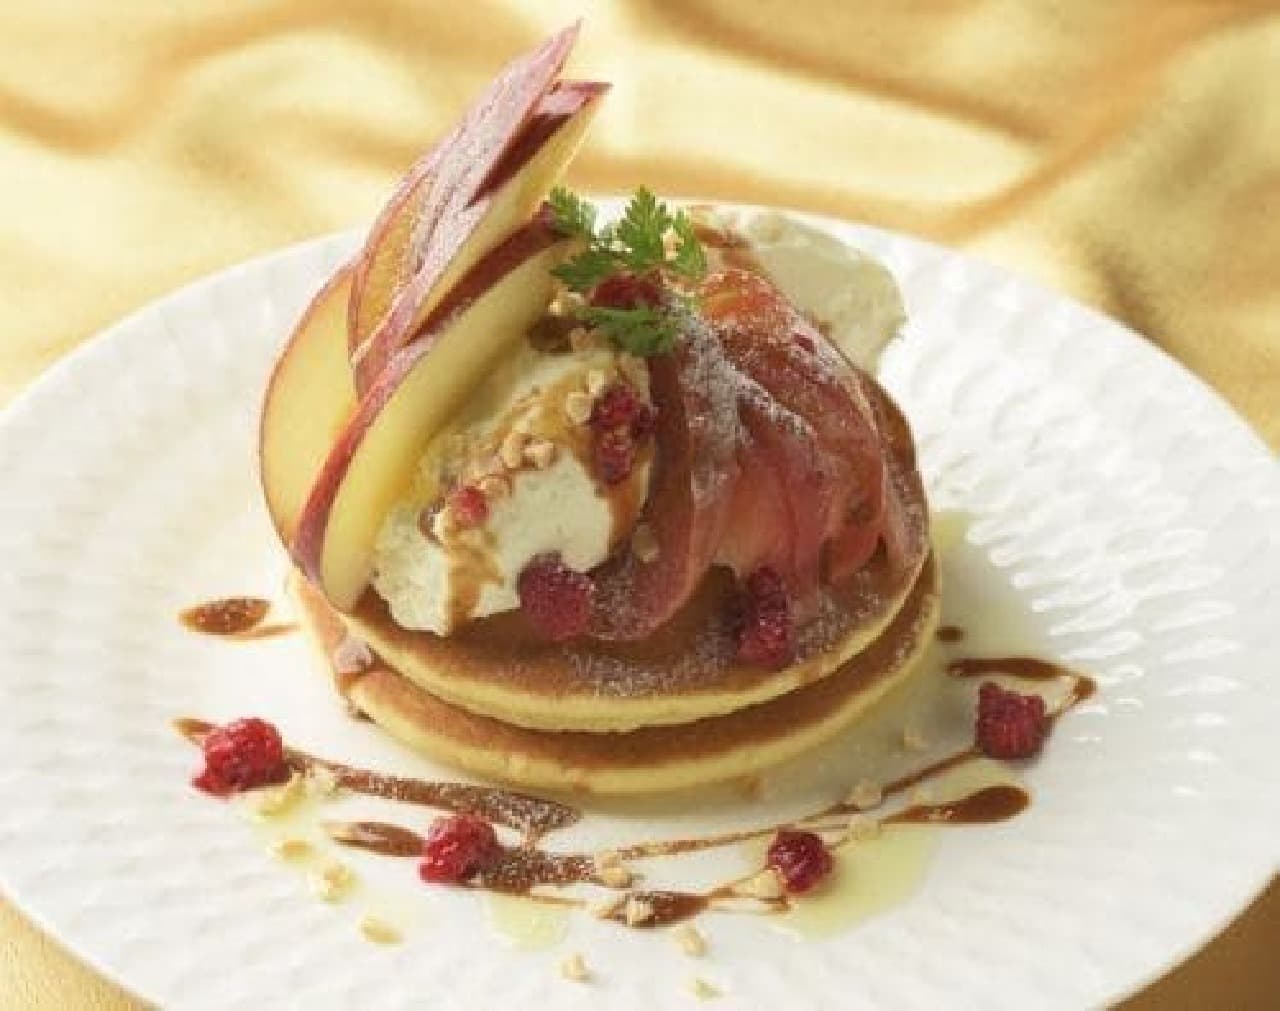 Ginza Cozy Corner "Apple and Cream Cheese Pancakes-Truffle Fragrance-"